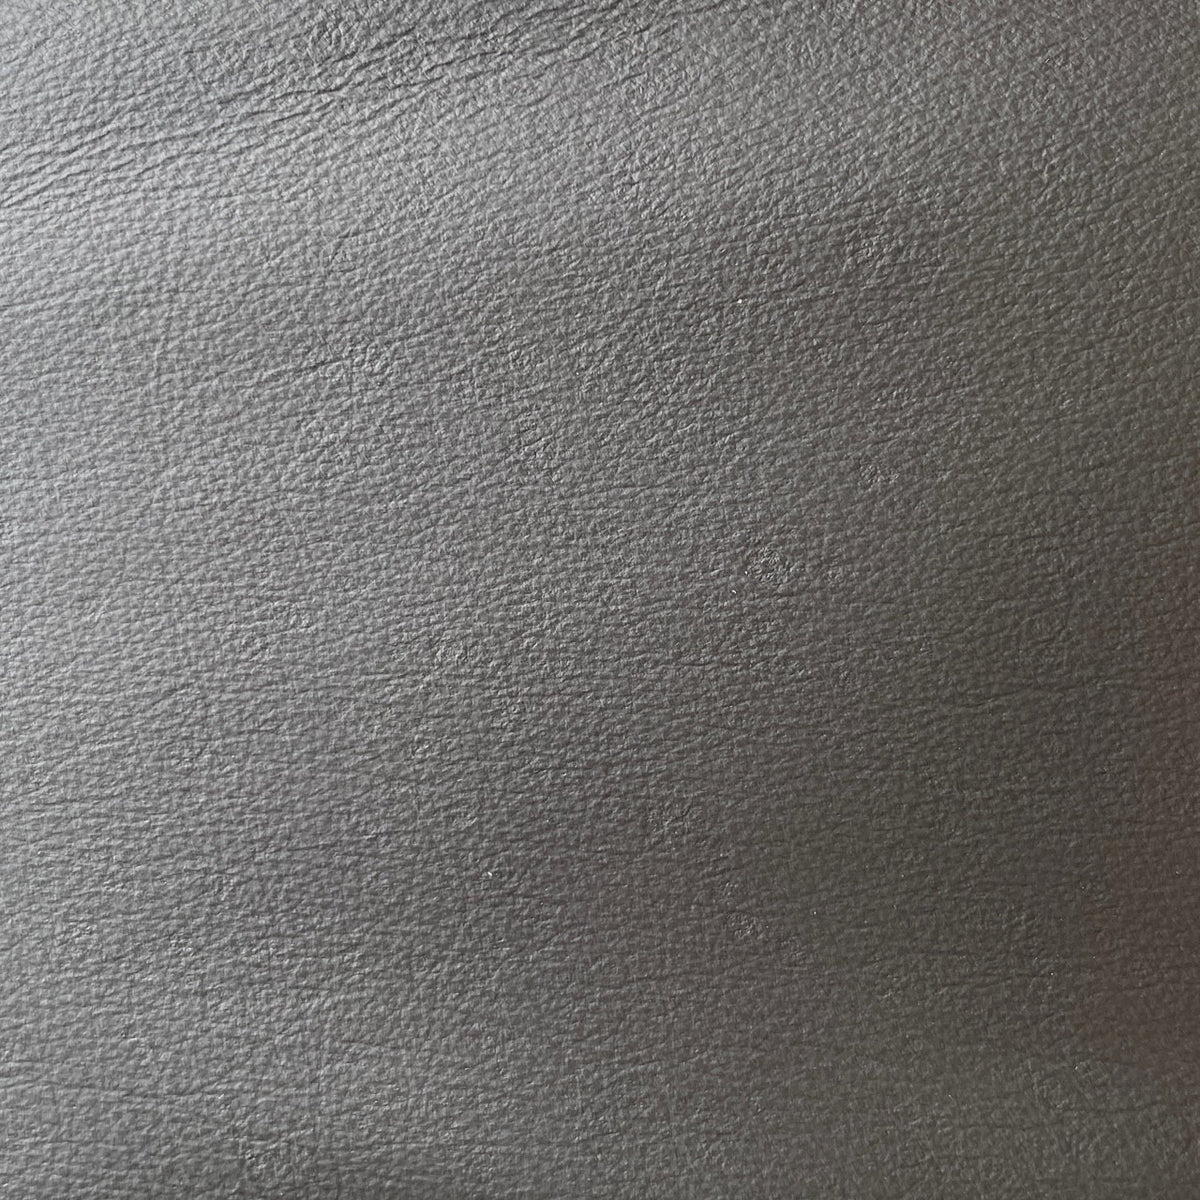 Upholstery Cow Hide #03 | Grey | 1.0/1.2mm | 54 sq.ft | $375 ea.